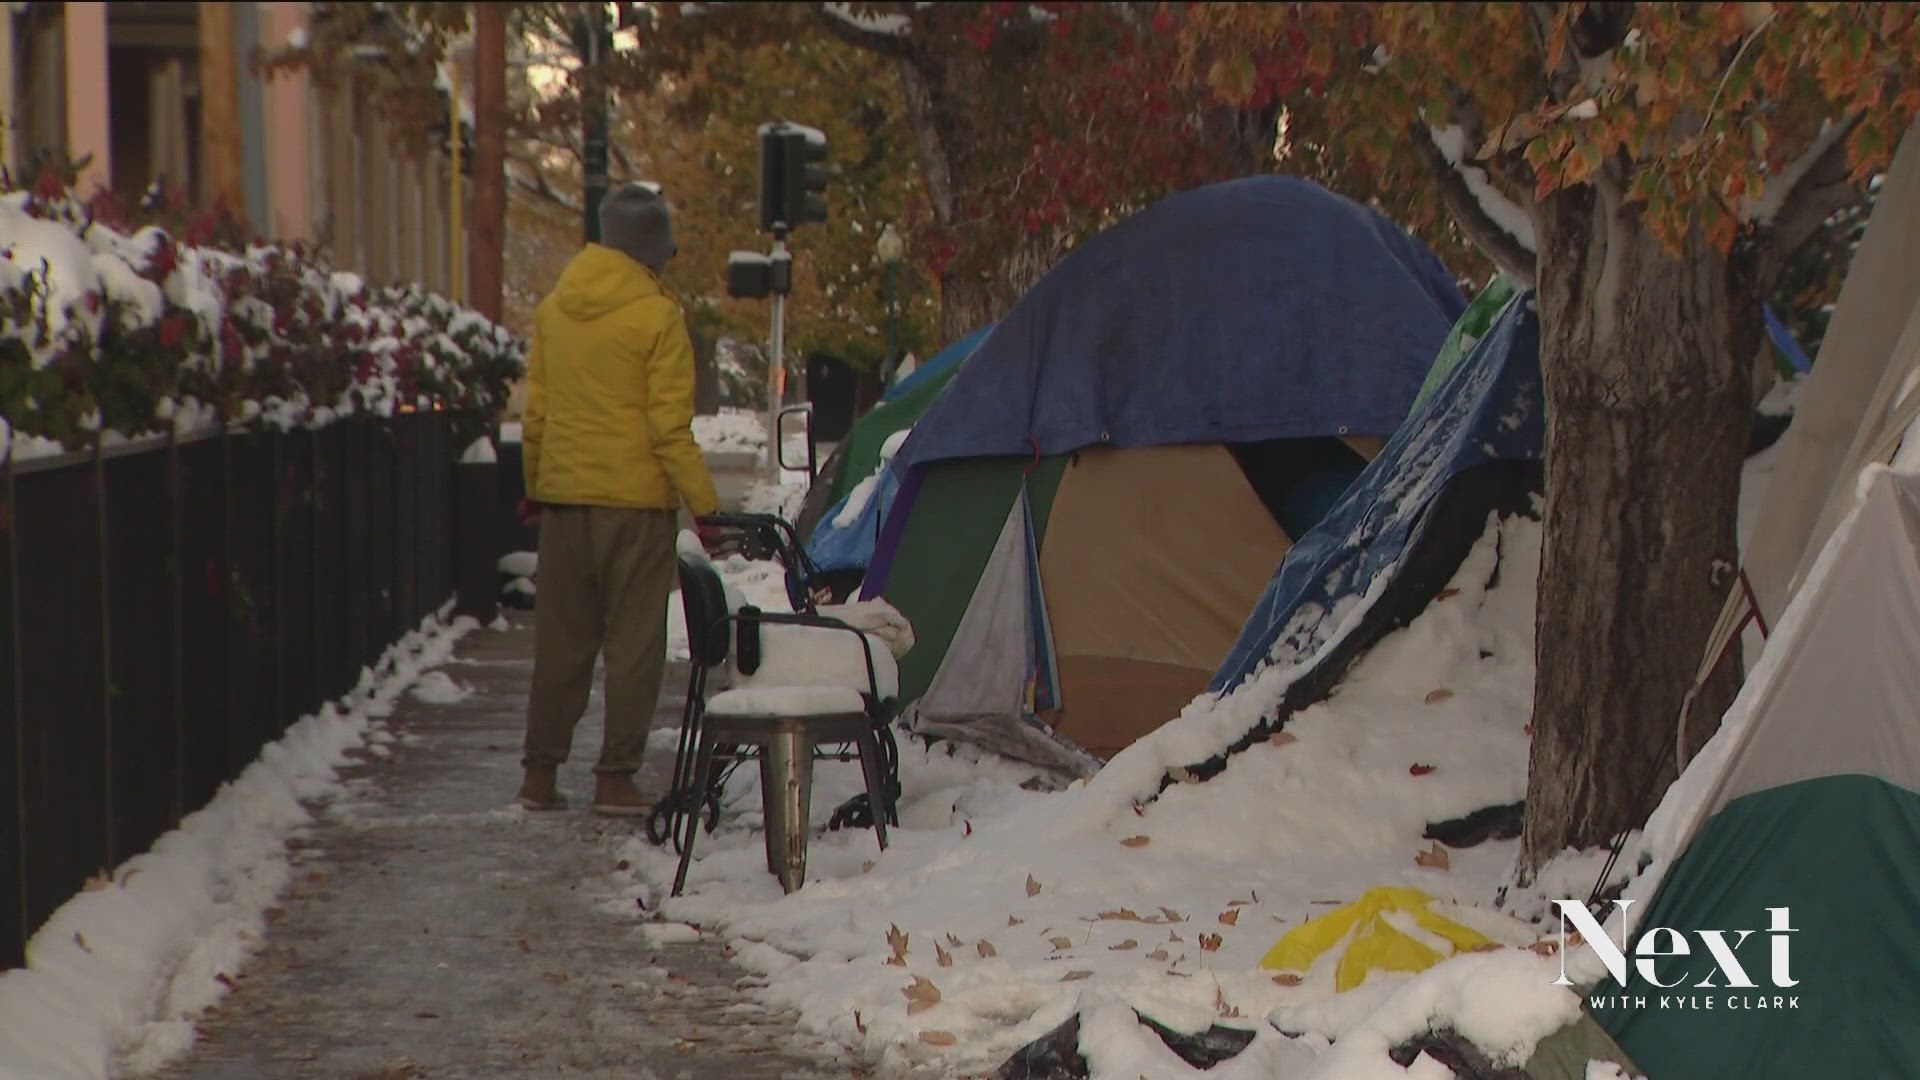 Denver can no longer force homeless people to move from outside living situations during freezing temperatures, at least for the time being.